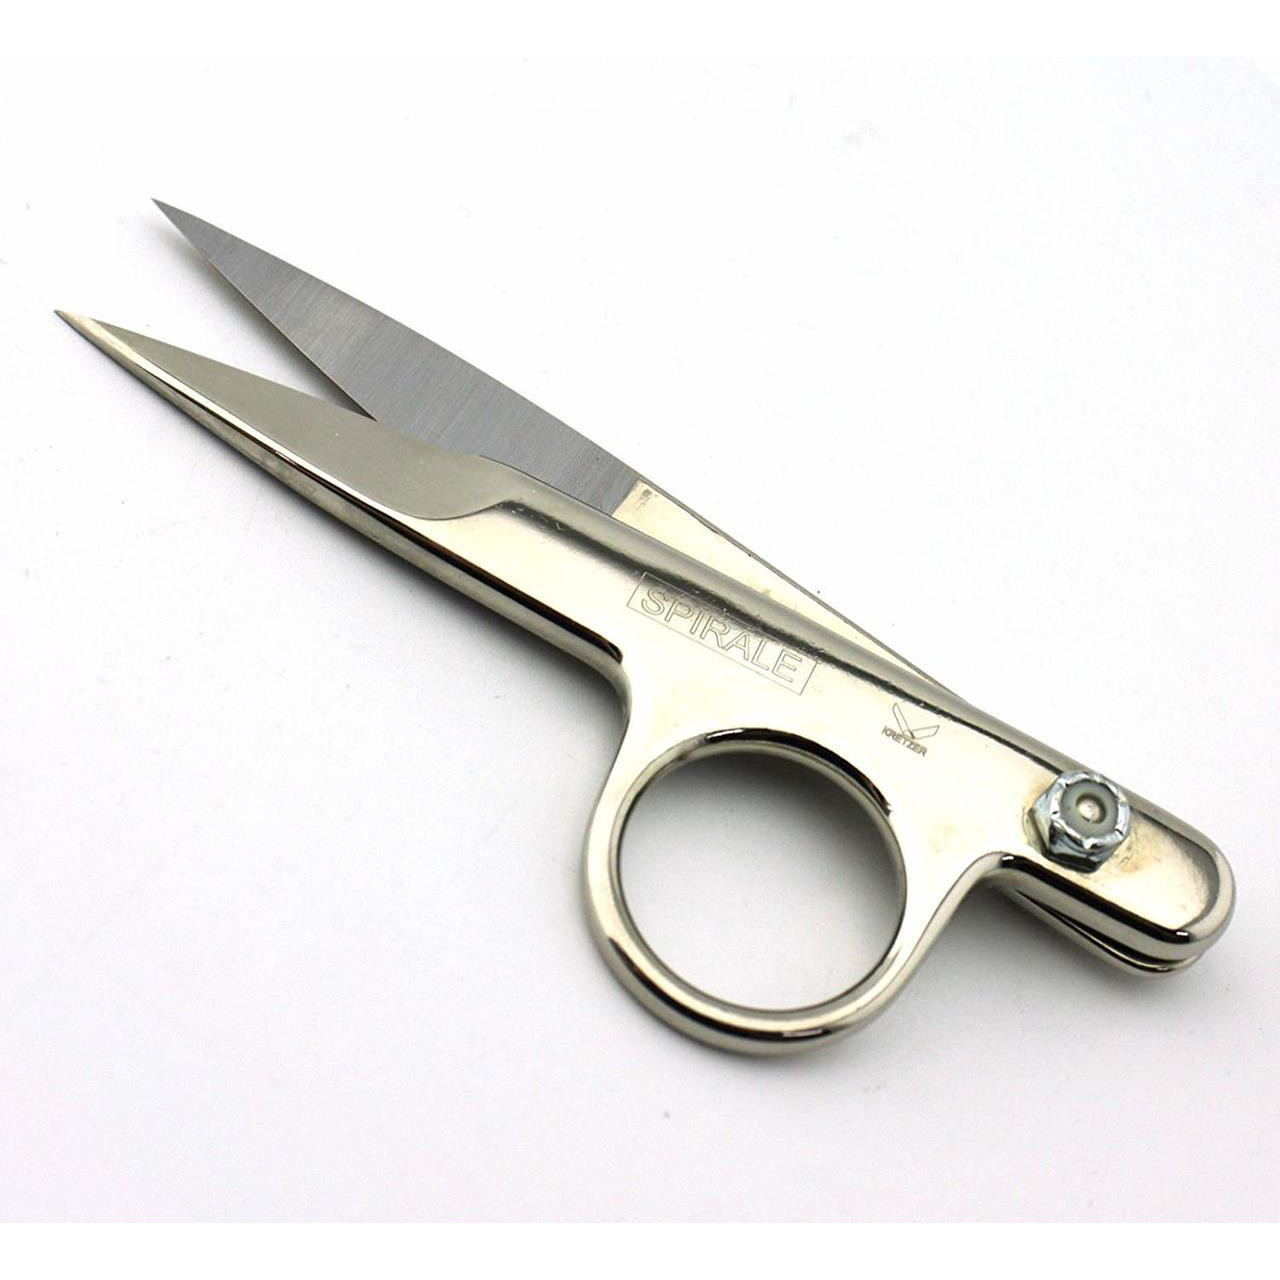 4.5 inch High End Thread Nipper- 100% Made in USA - Professional Series with Red Rubber Safety Cap - for Sewing, Tailoring